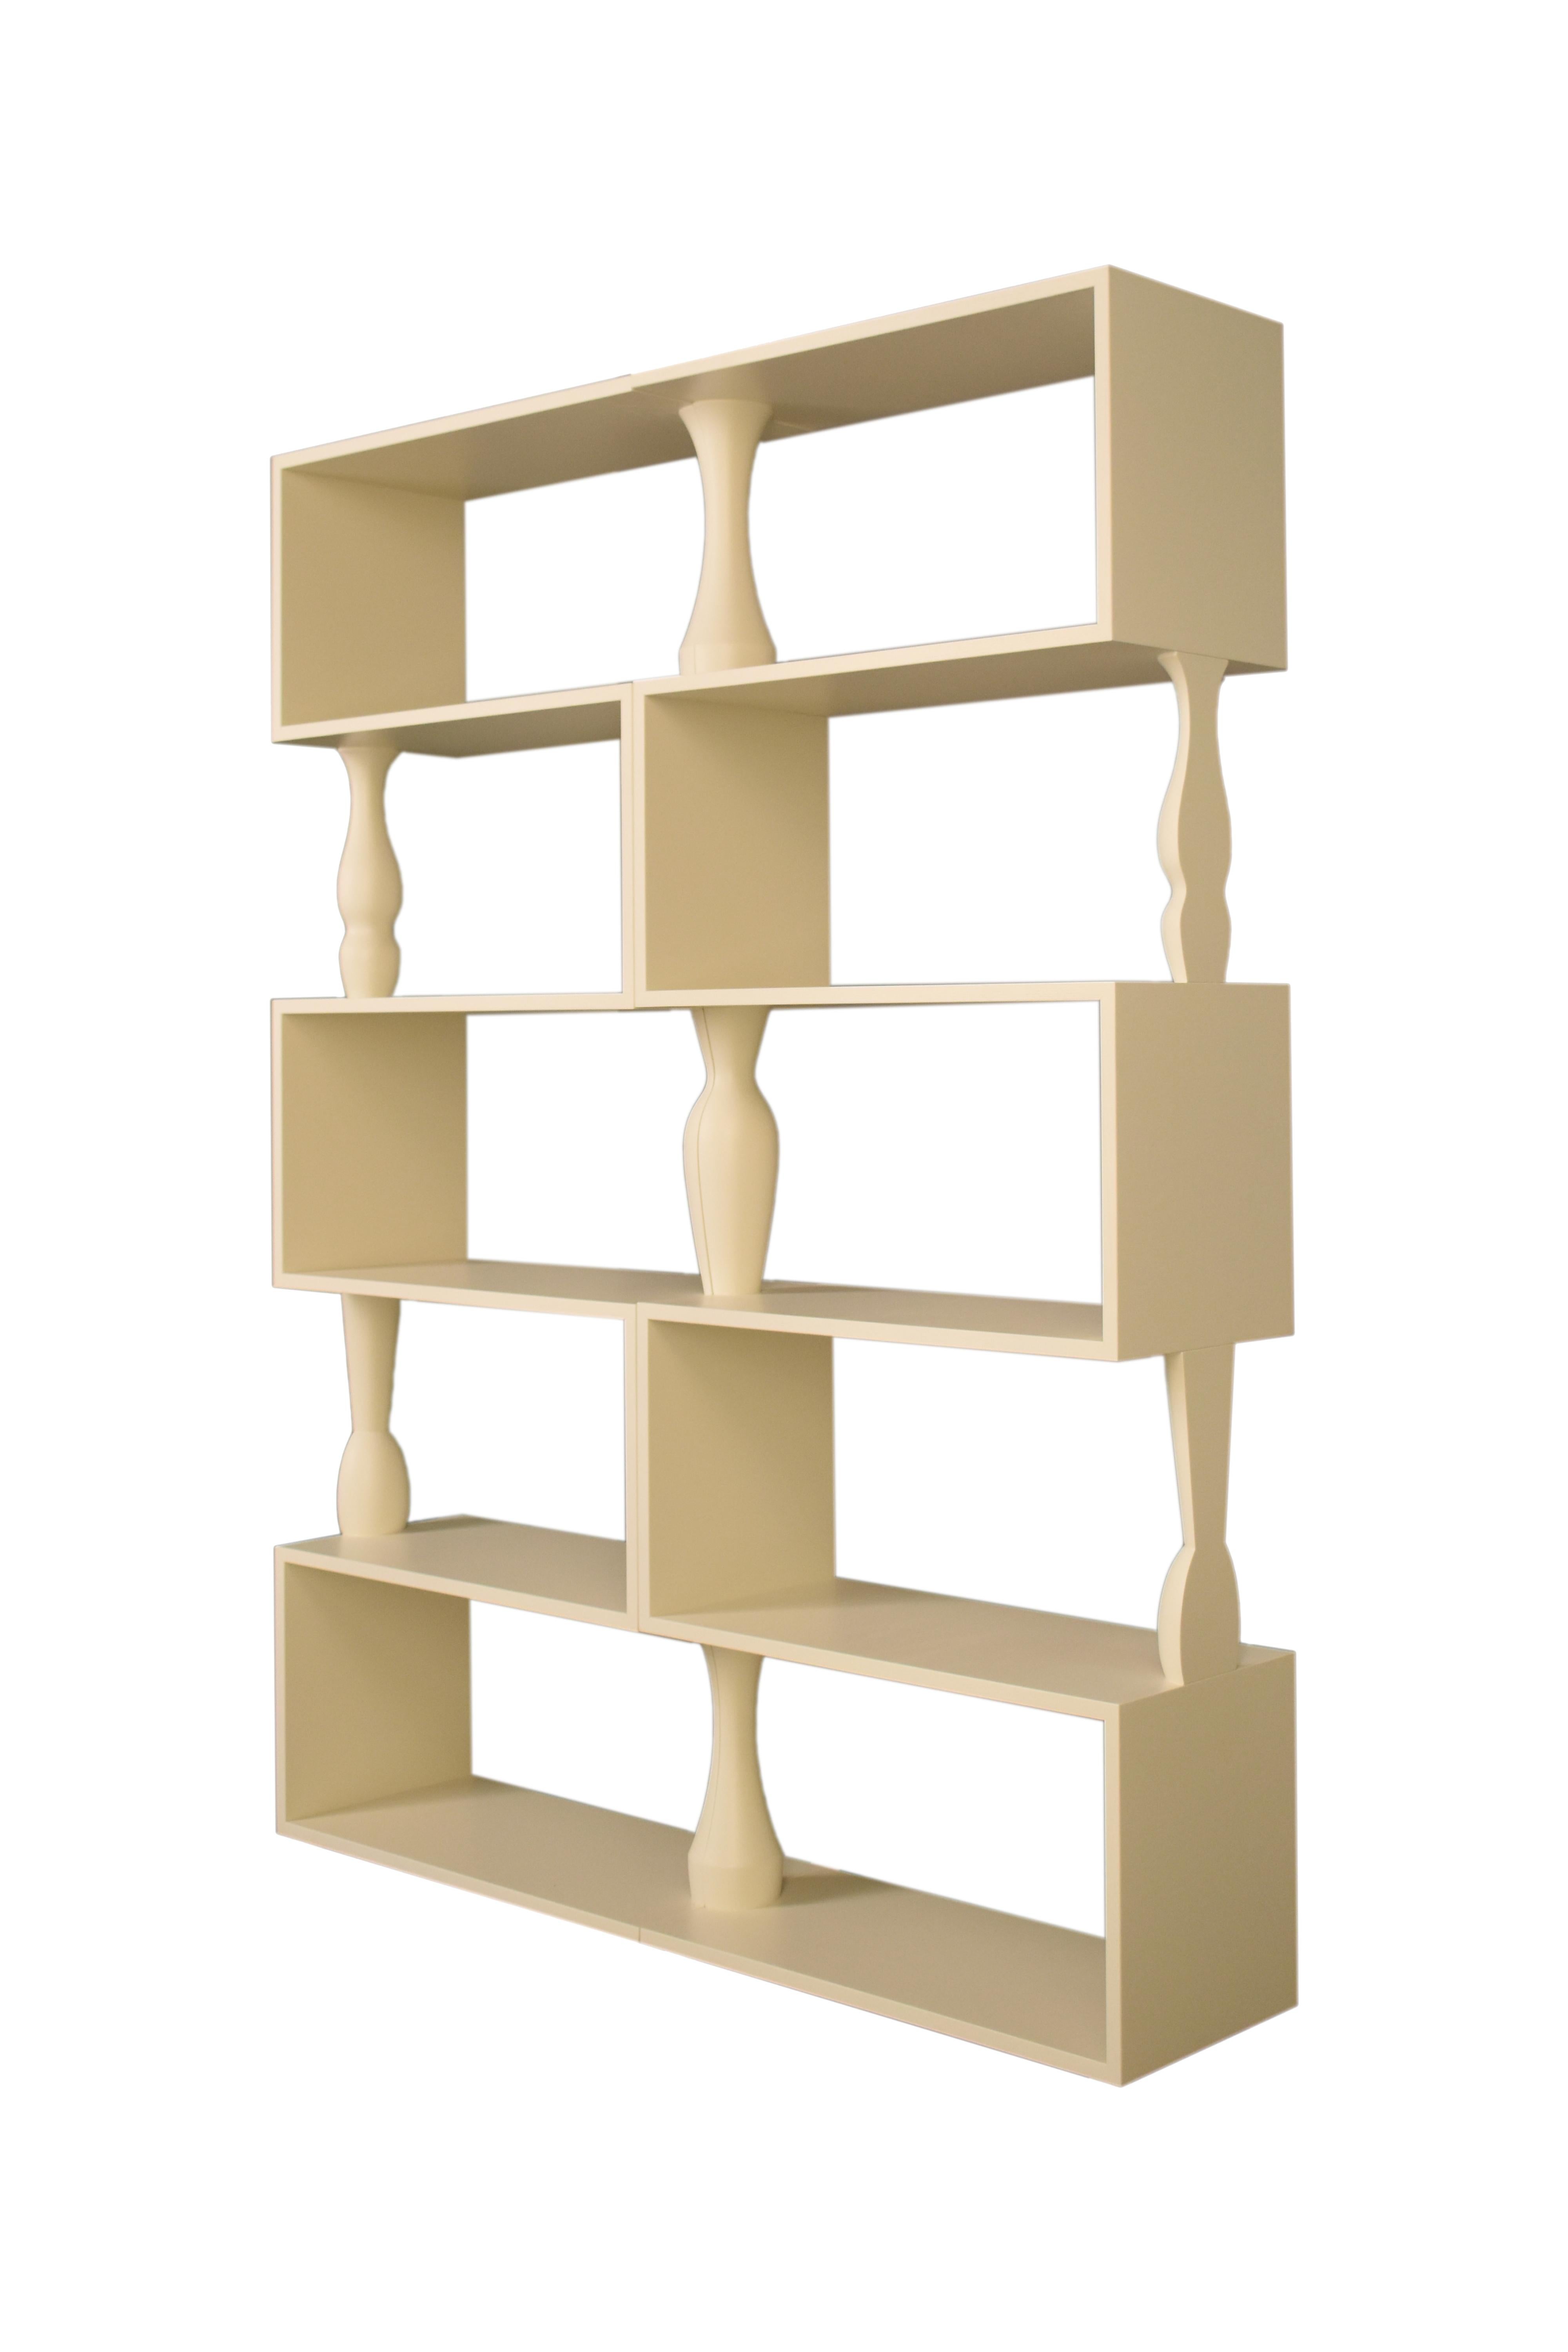 Perbacco, Contemporary Bookcase in Ash Wood with Turned Columns, by Morelato In New Condition For Sale In Salizzole, IT